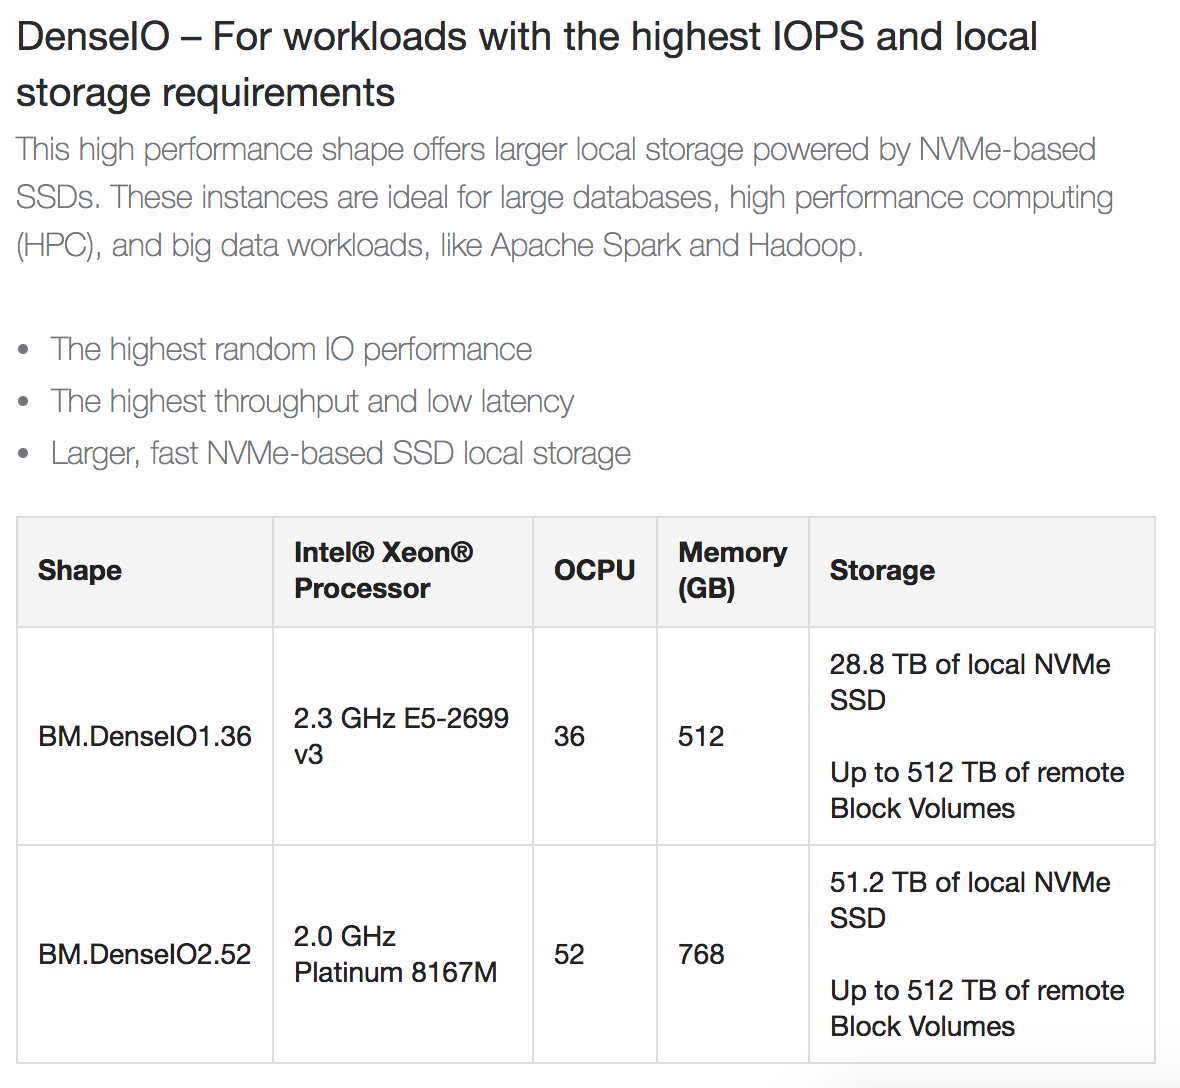 DenseIO instances are for those processes that have the most demanding local storage.